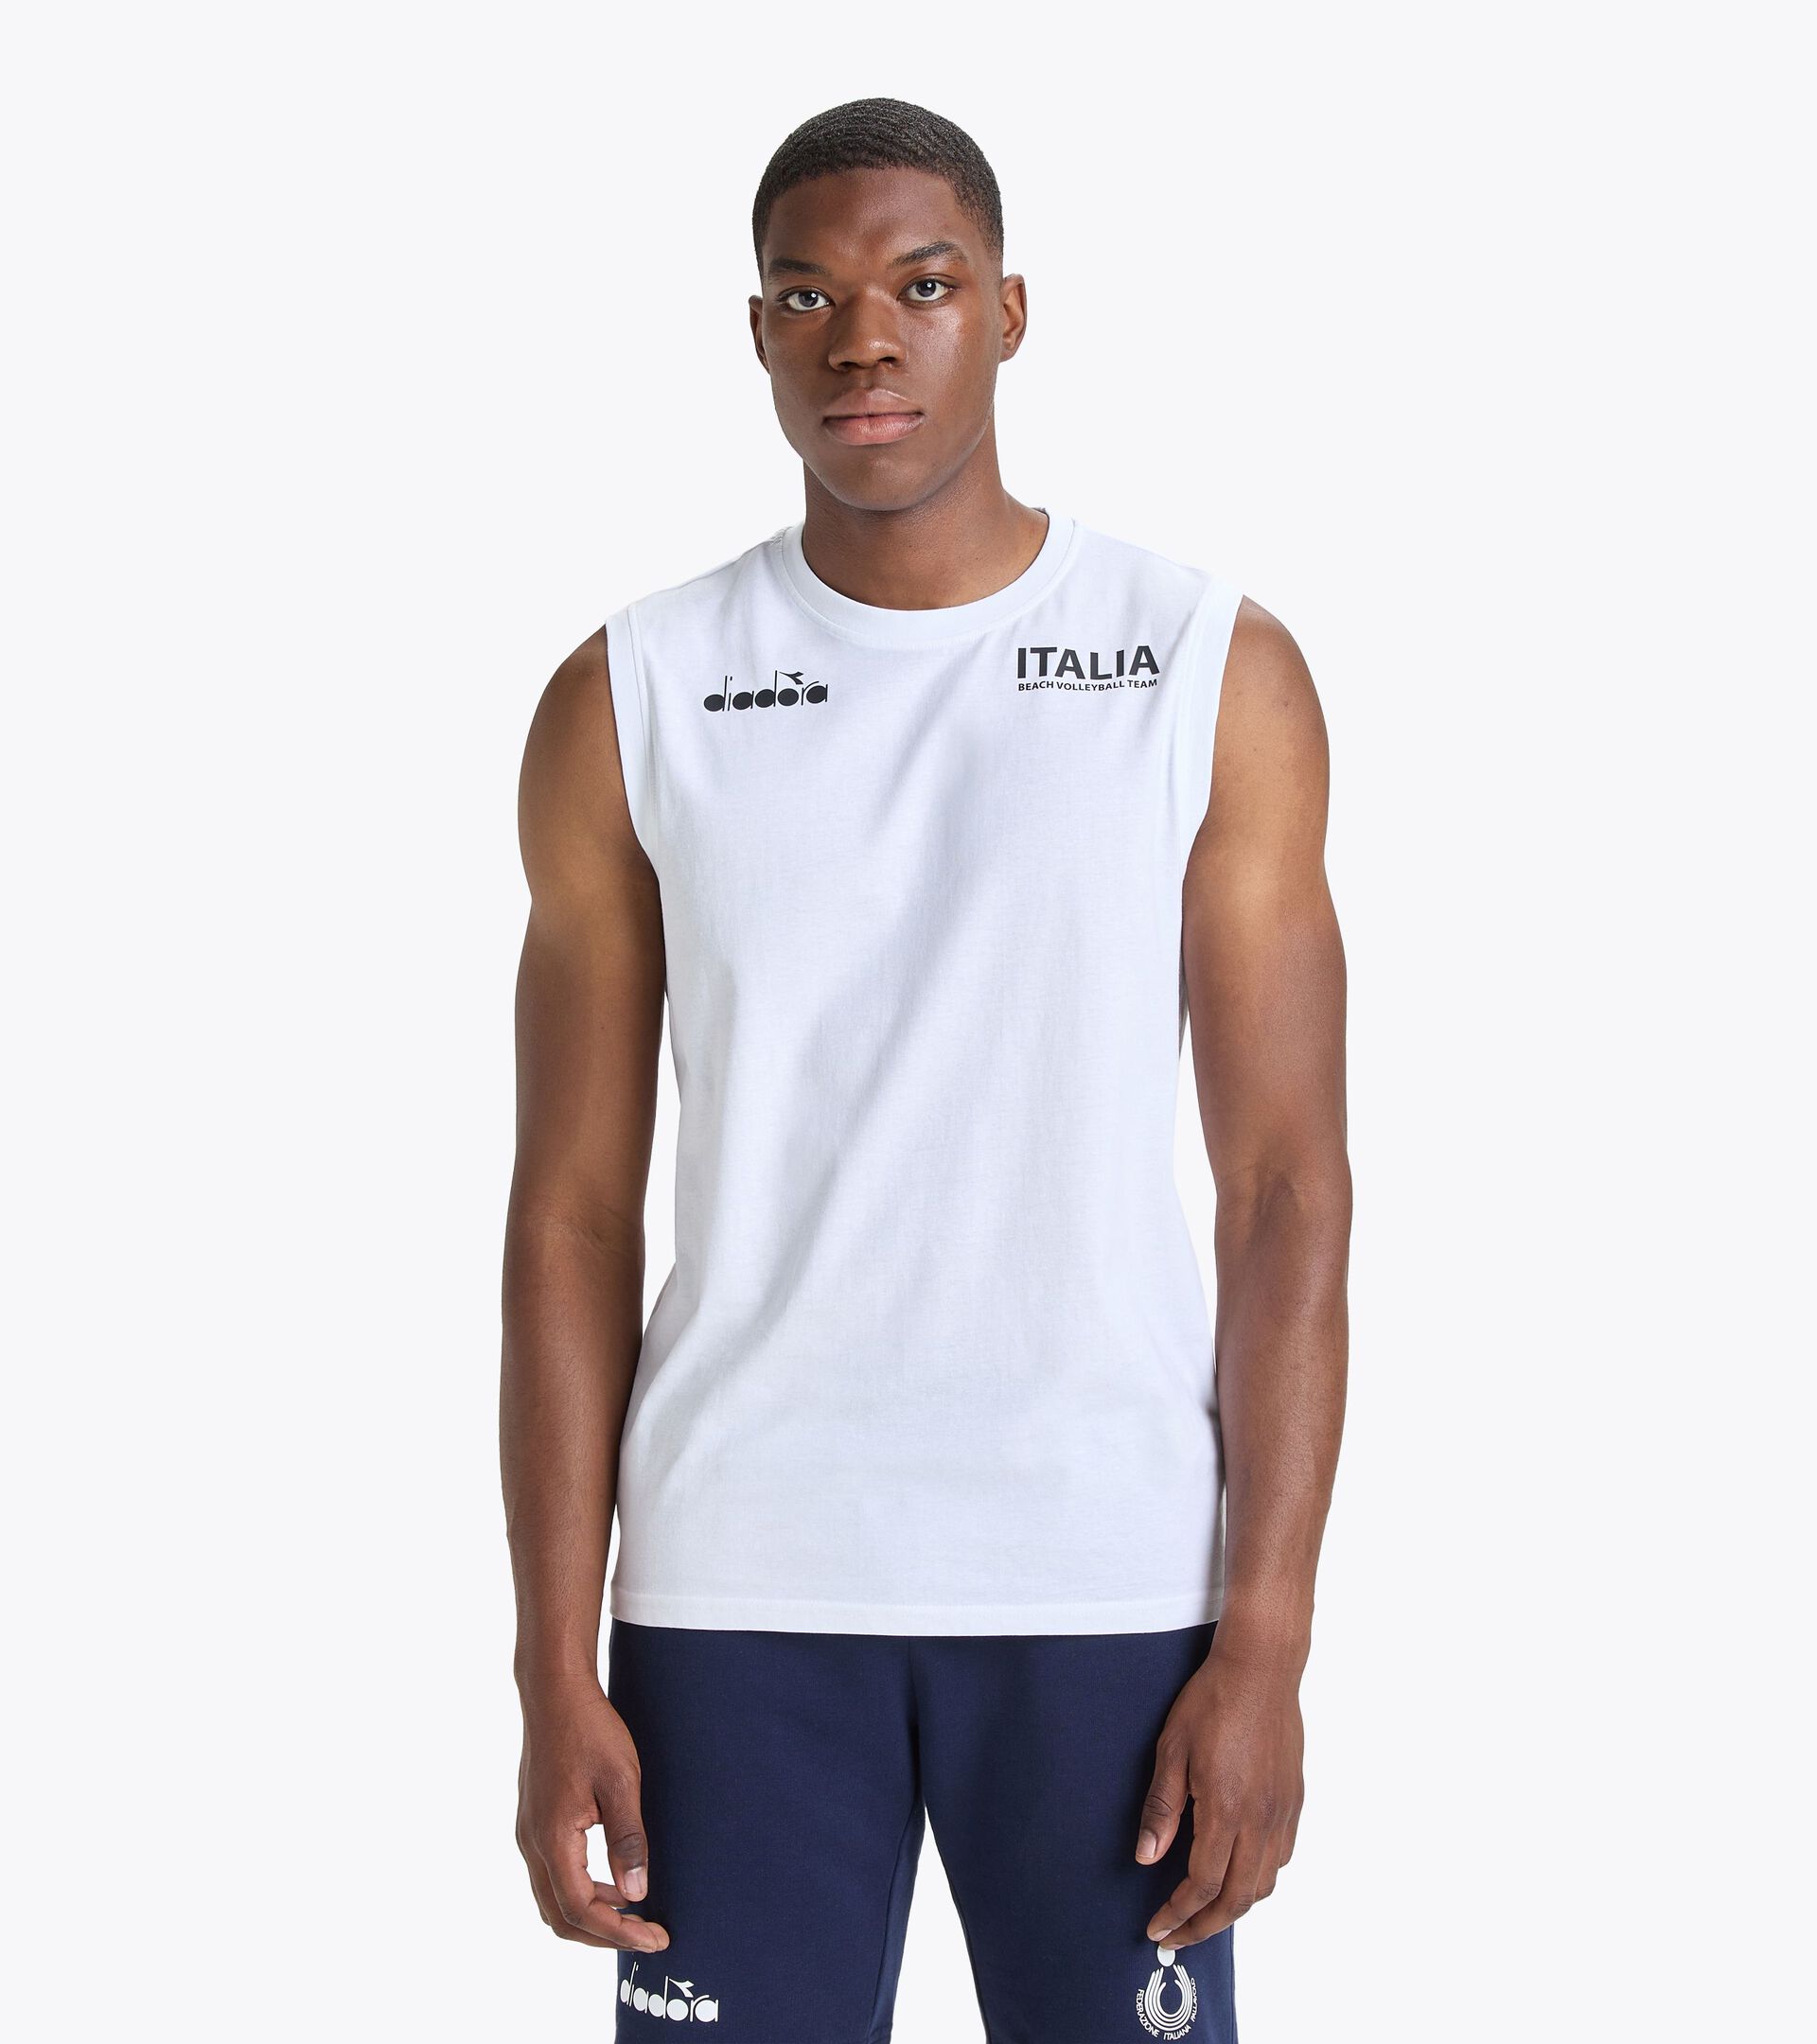 Tops and Sports Bras for Running - Diadora Online Shop